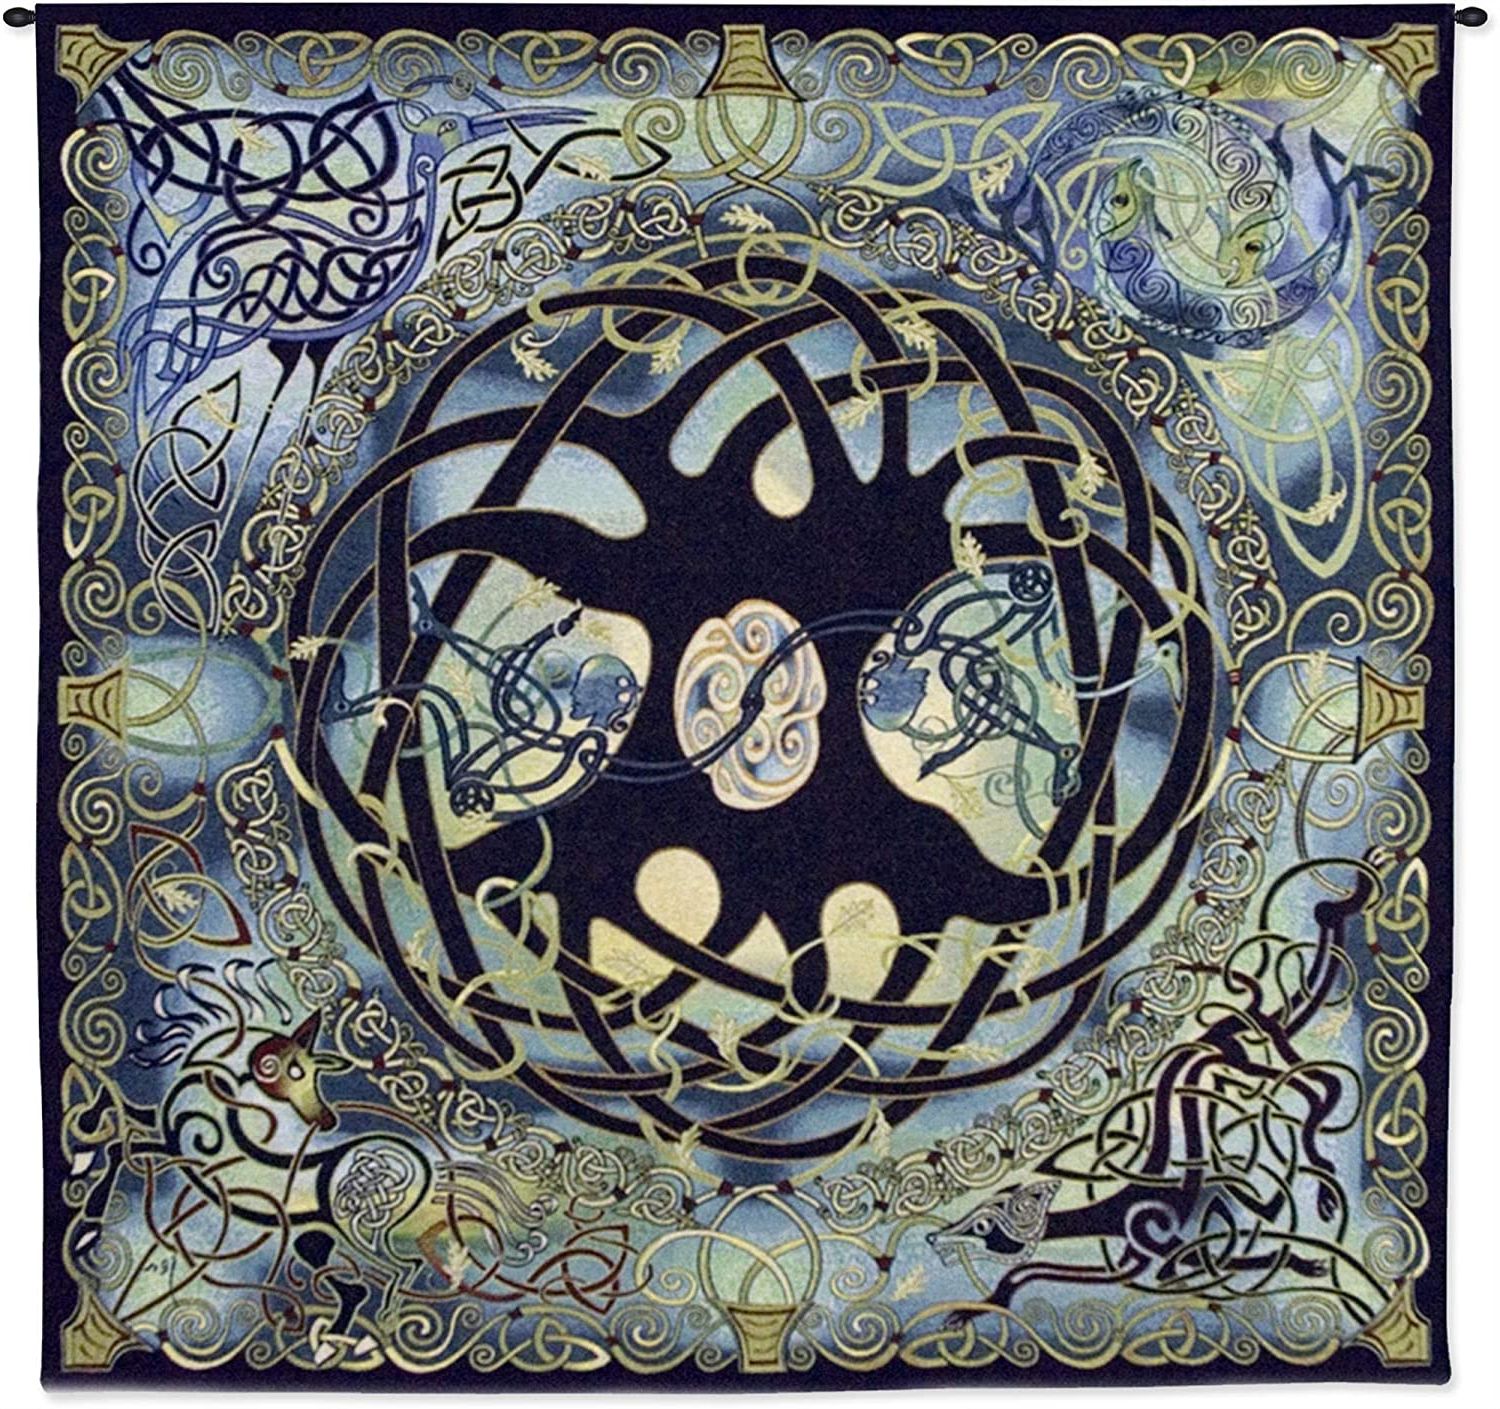 Well Known Blended Fabric Trust In The Lord Tapestries And Wall Hangings With Regard To Fine Art Tapestries Celtic Tree Of Life Hand Finished European Style  Jacquard Woven Wall Tapestry Usa Size 51x (View 4 of 20)